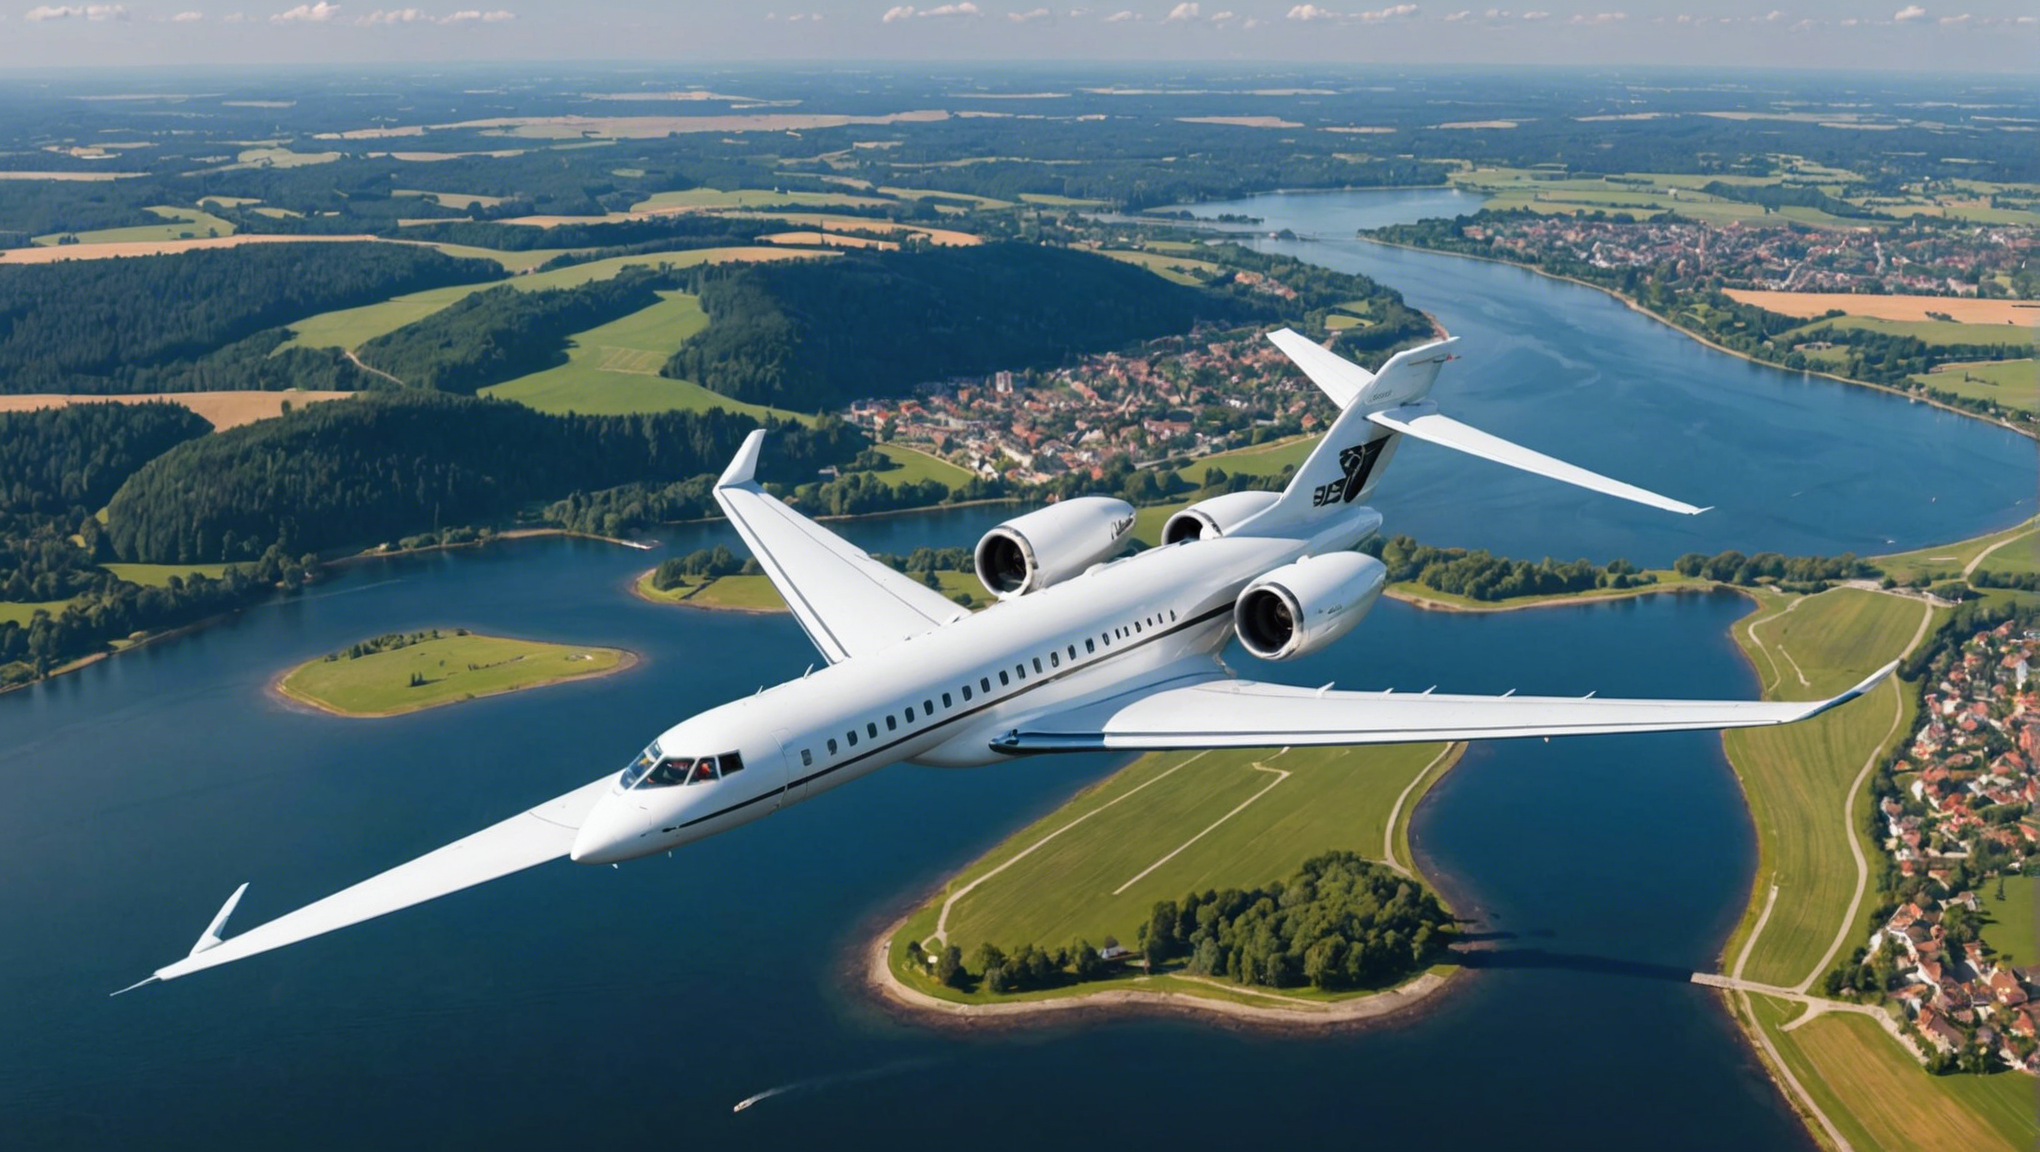 discover pegasus, the new german signal interception platform integrated into the global 6000, which is making great strides forward.